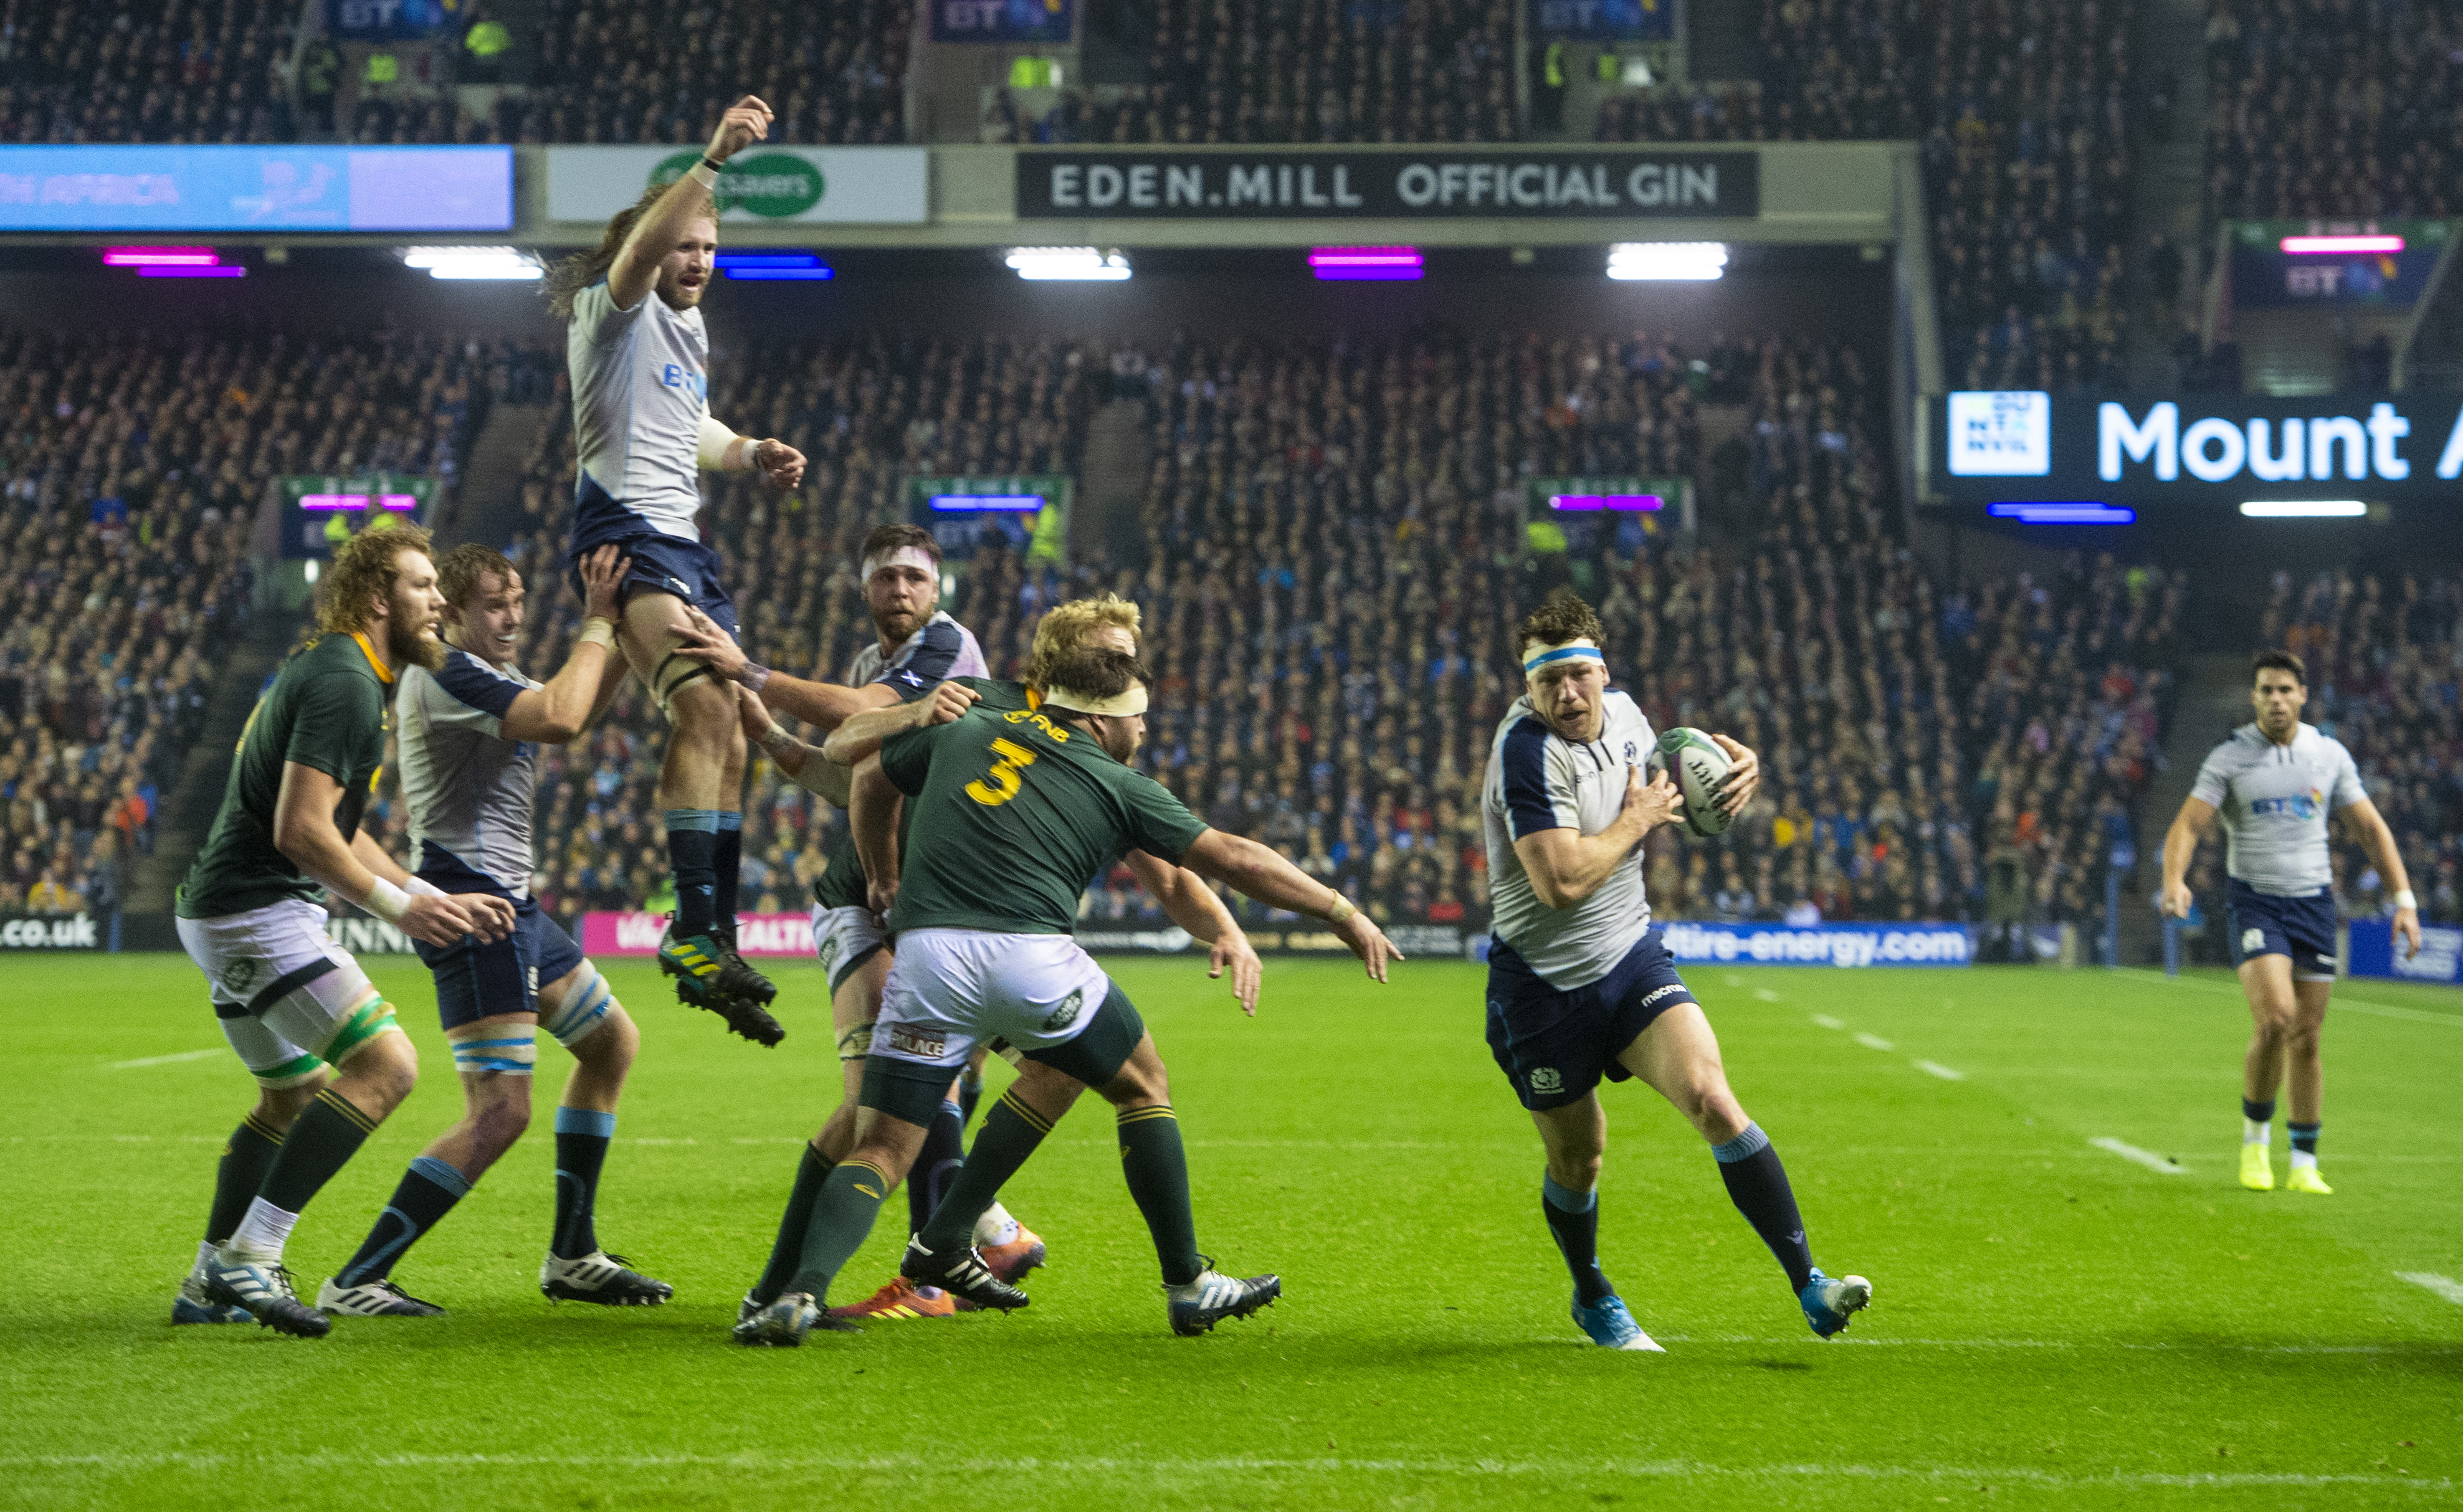 Hamish Watson scores from a trick lineout play for Scotland against South Africa.